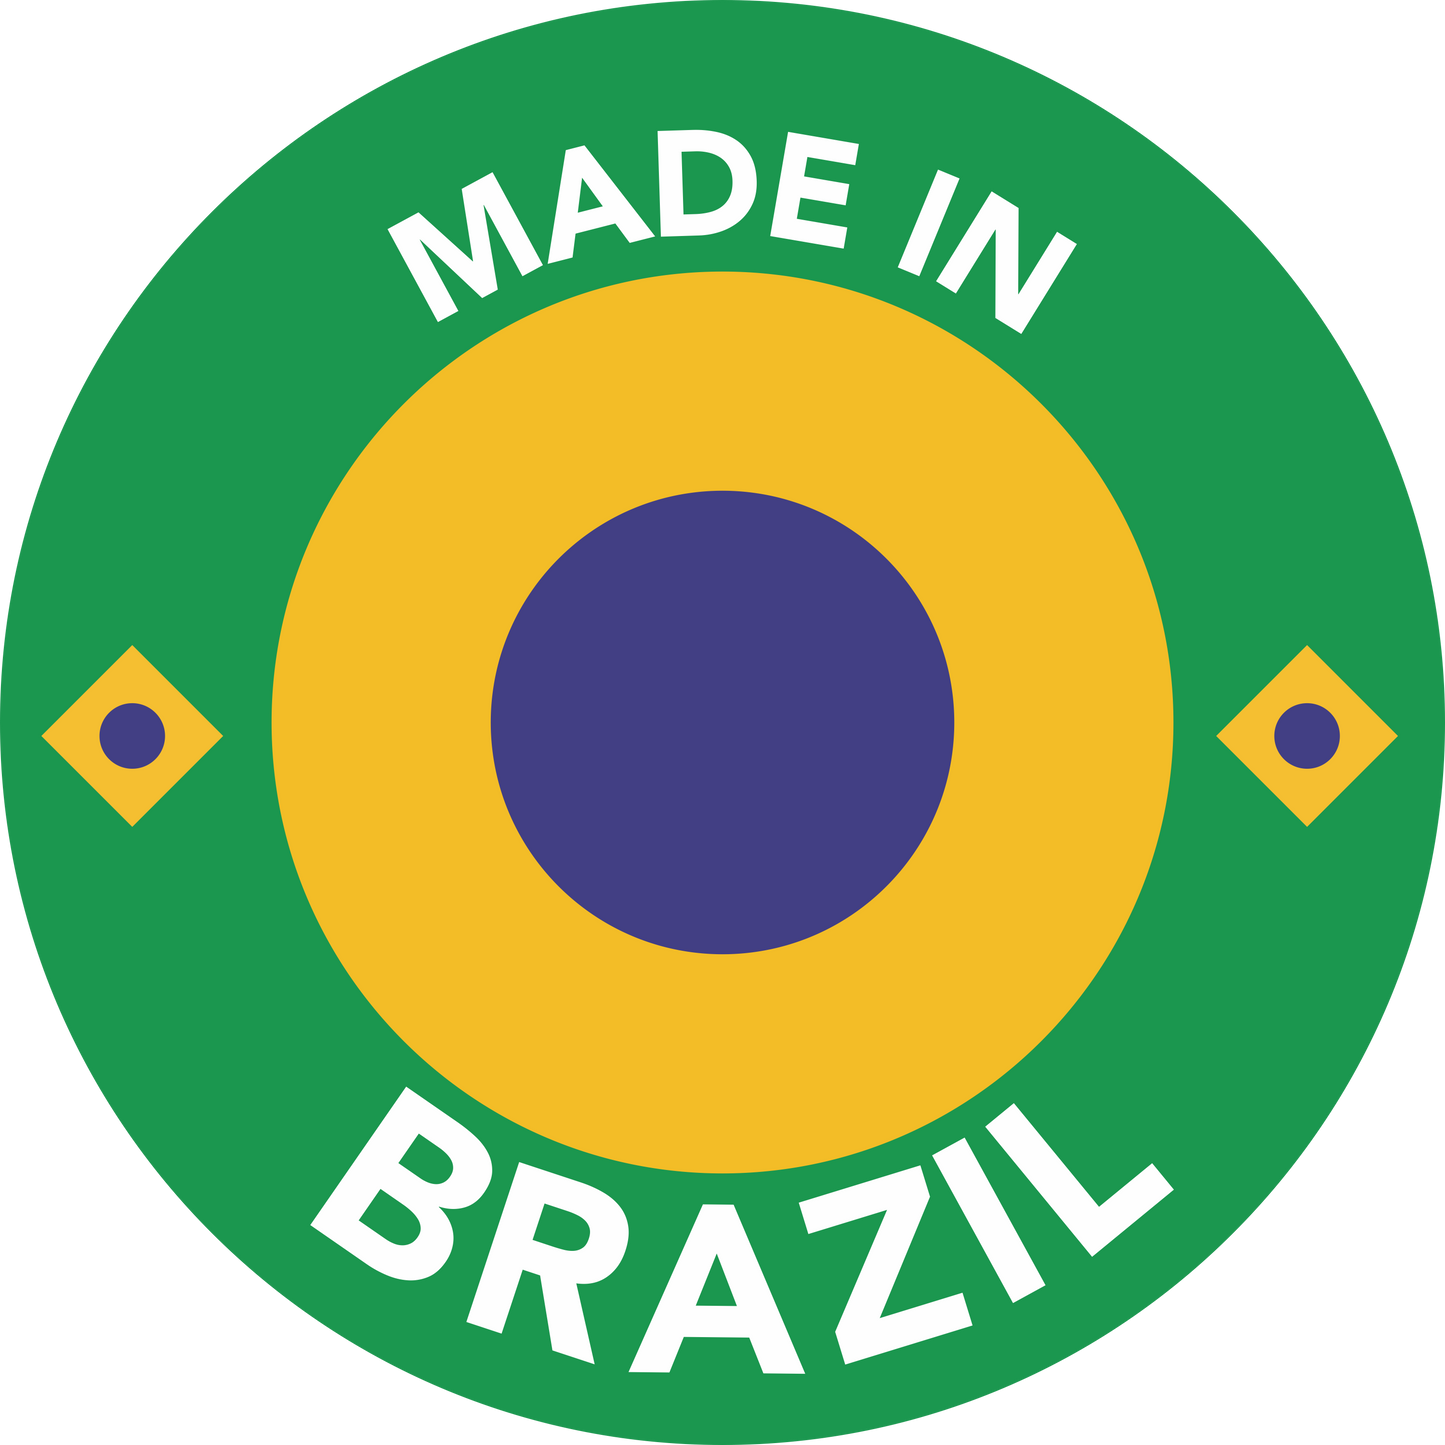 Brazilian-made product label, highlighting the product's origin with national colors.